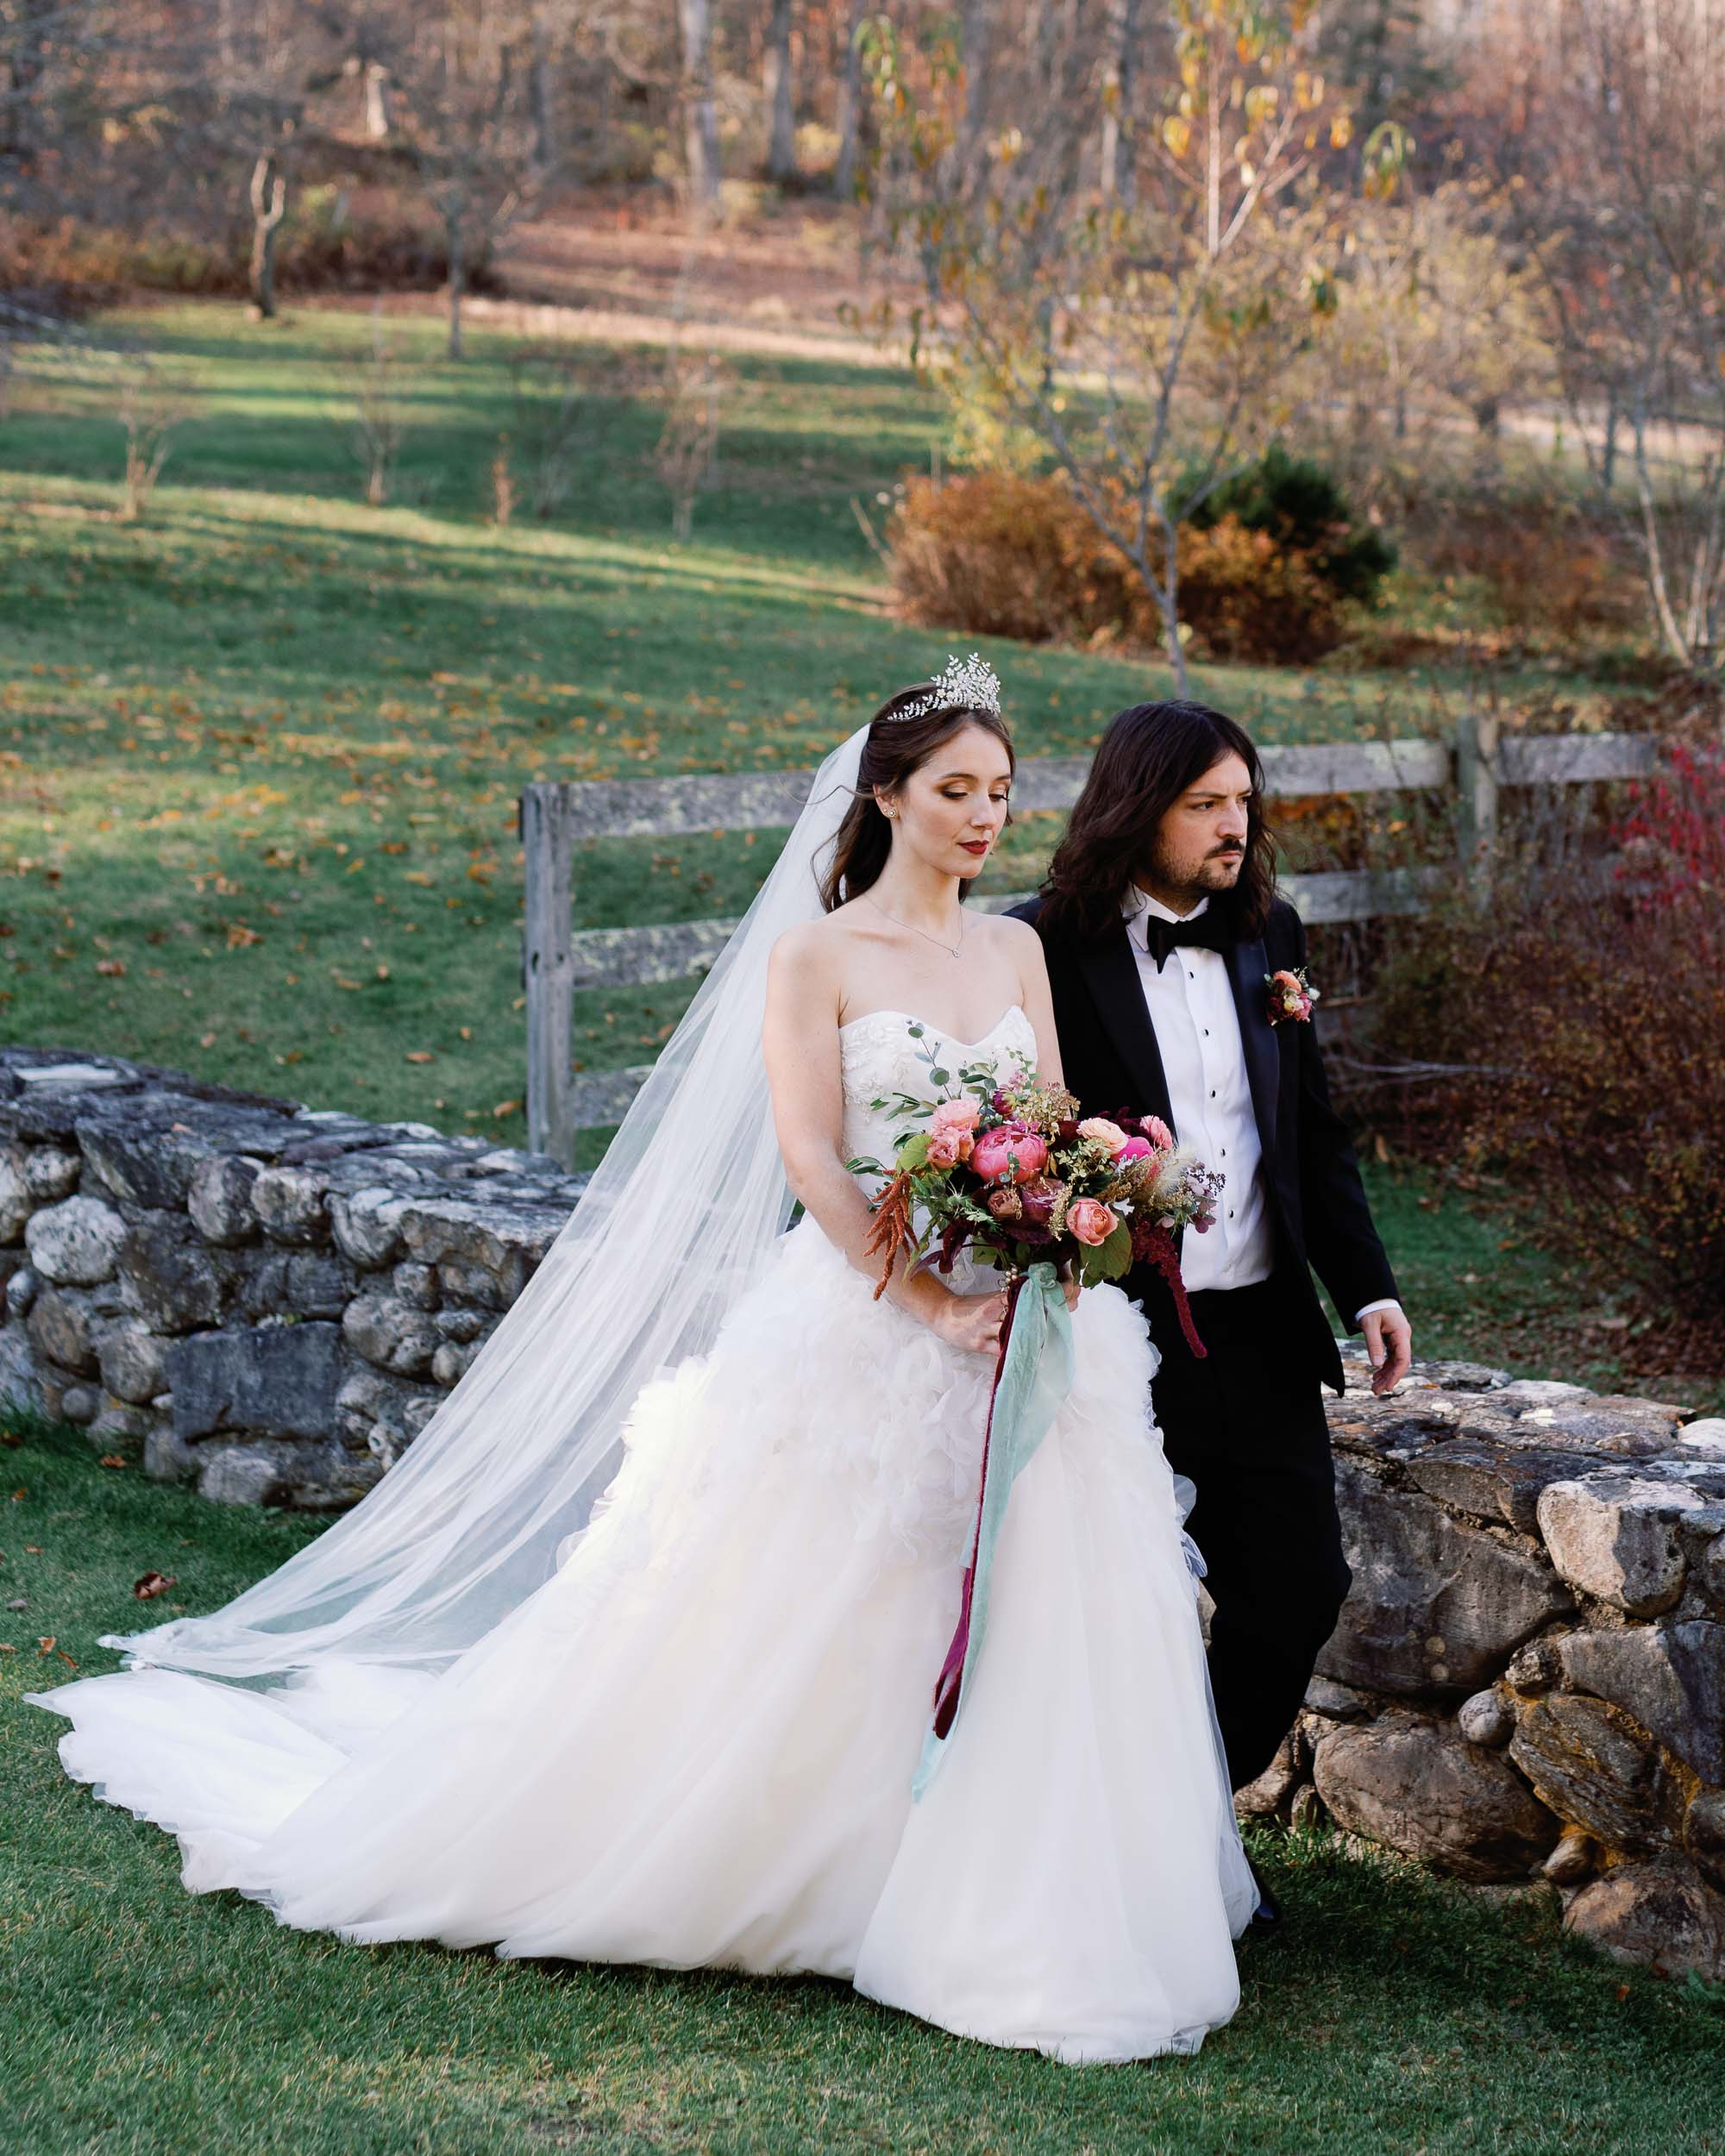 regal wedding looks from marchesa bride with tiara in vt